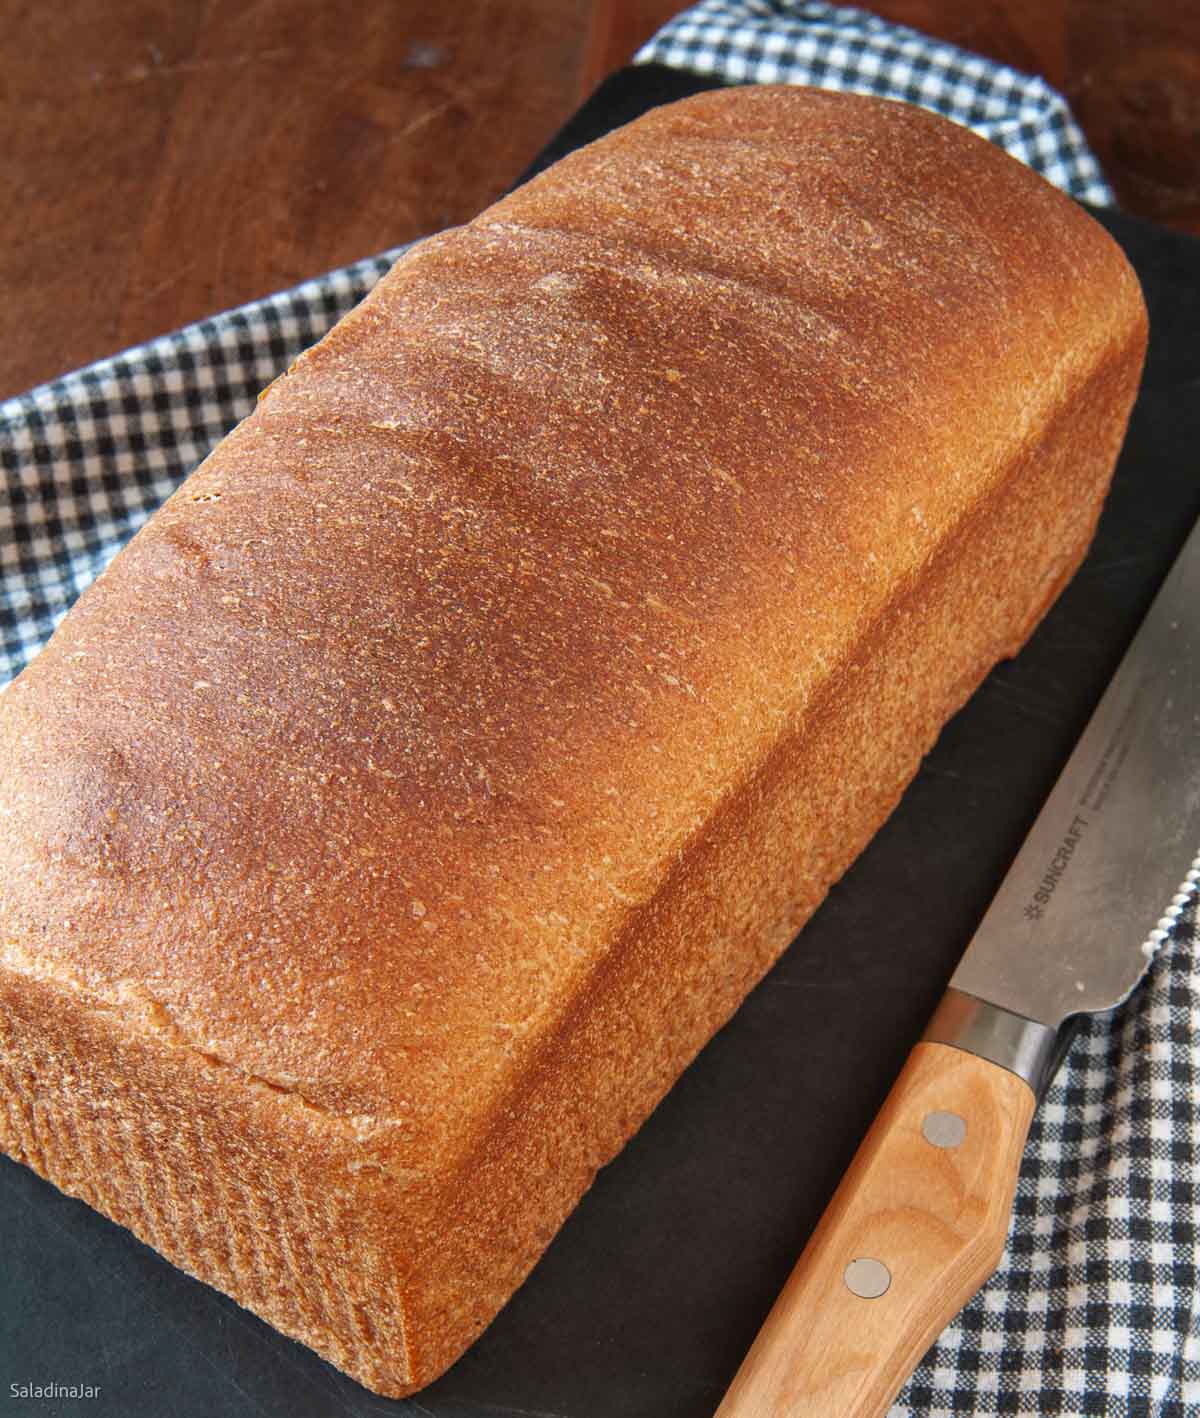 unslice bread baked in a pullman pan